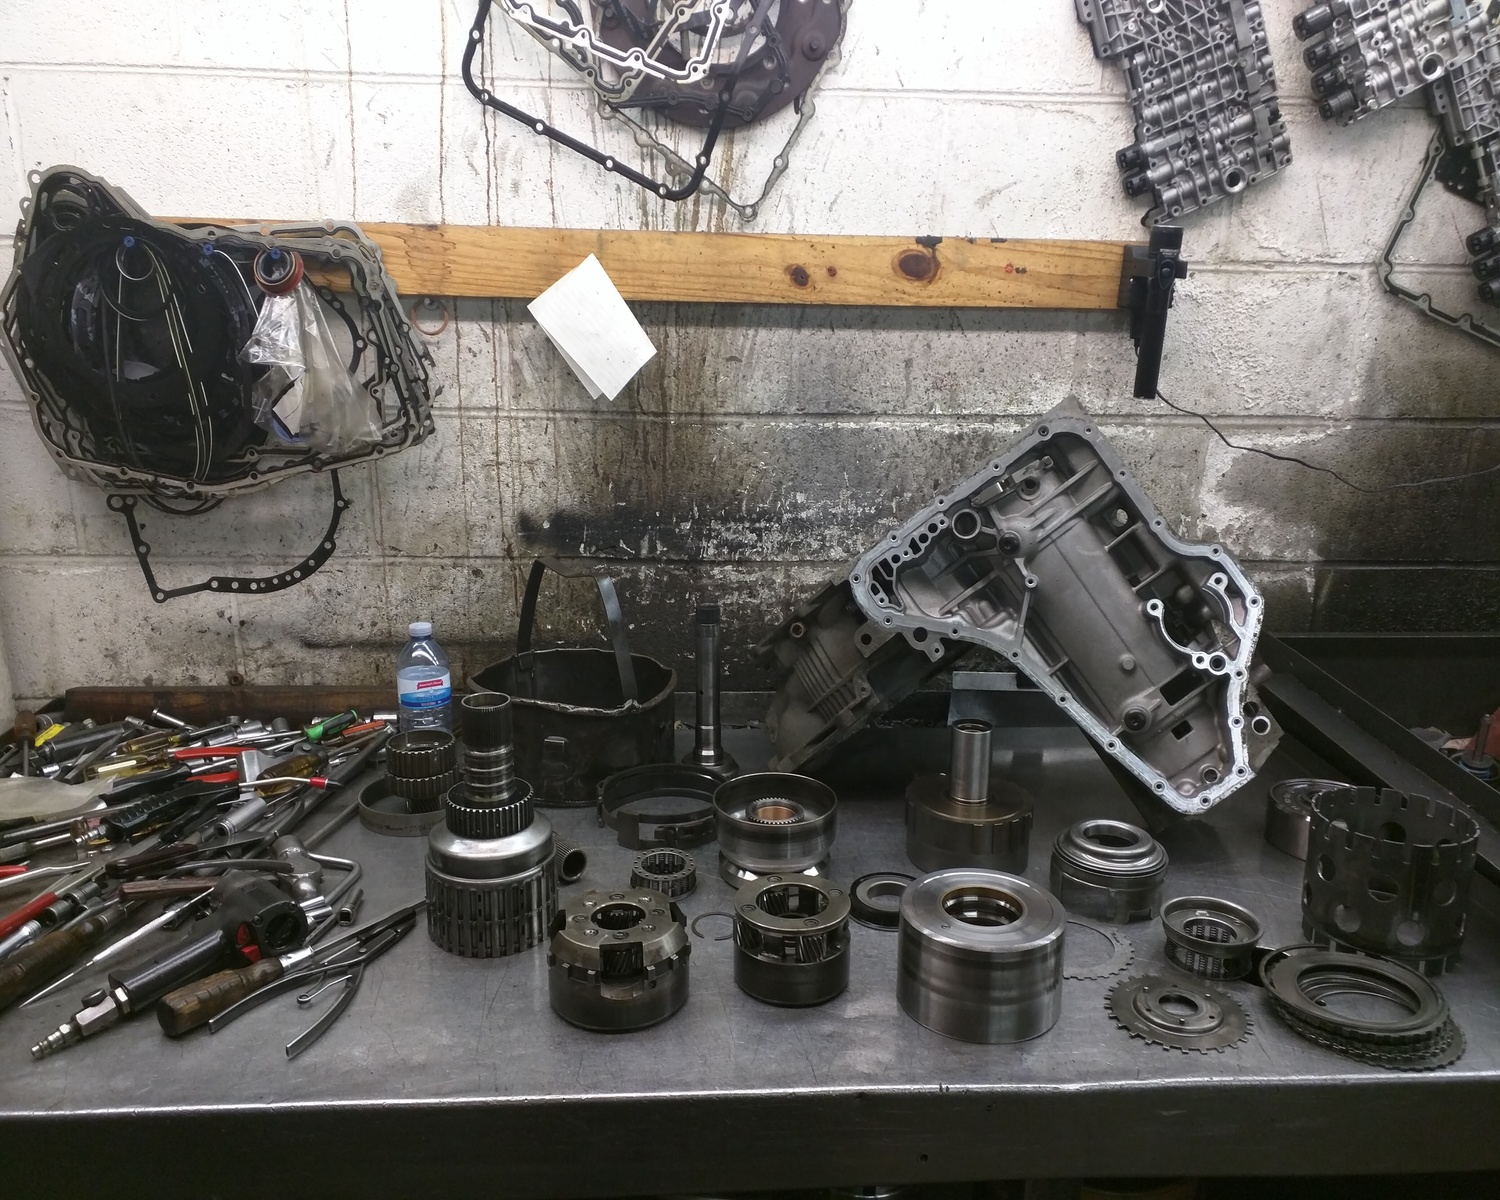 Transmission Rebuild Northeast Philadelphia 19136 19135 We Rebuild Transmissions We repair all makes and models of all manual & automatic transmissions but also four-wheel drive transmissions and front wheel drive transmissions